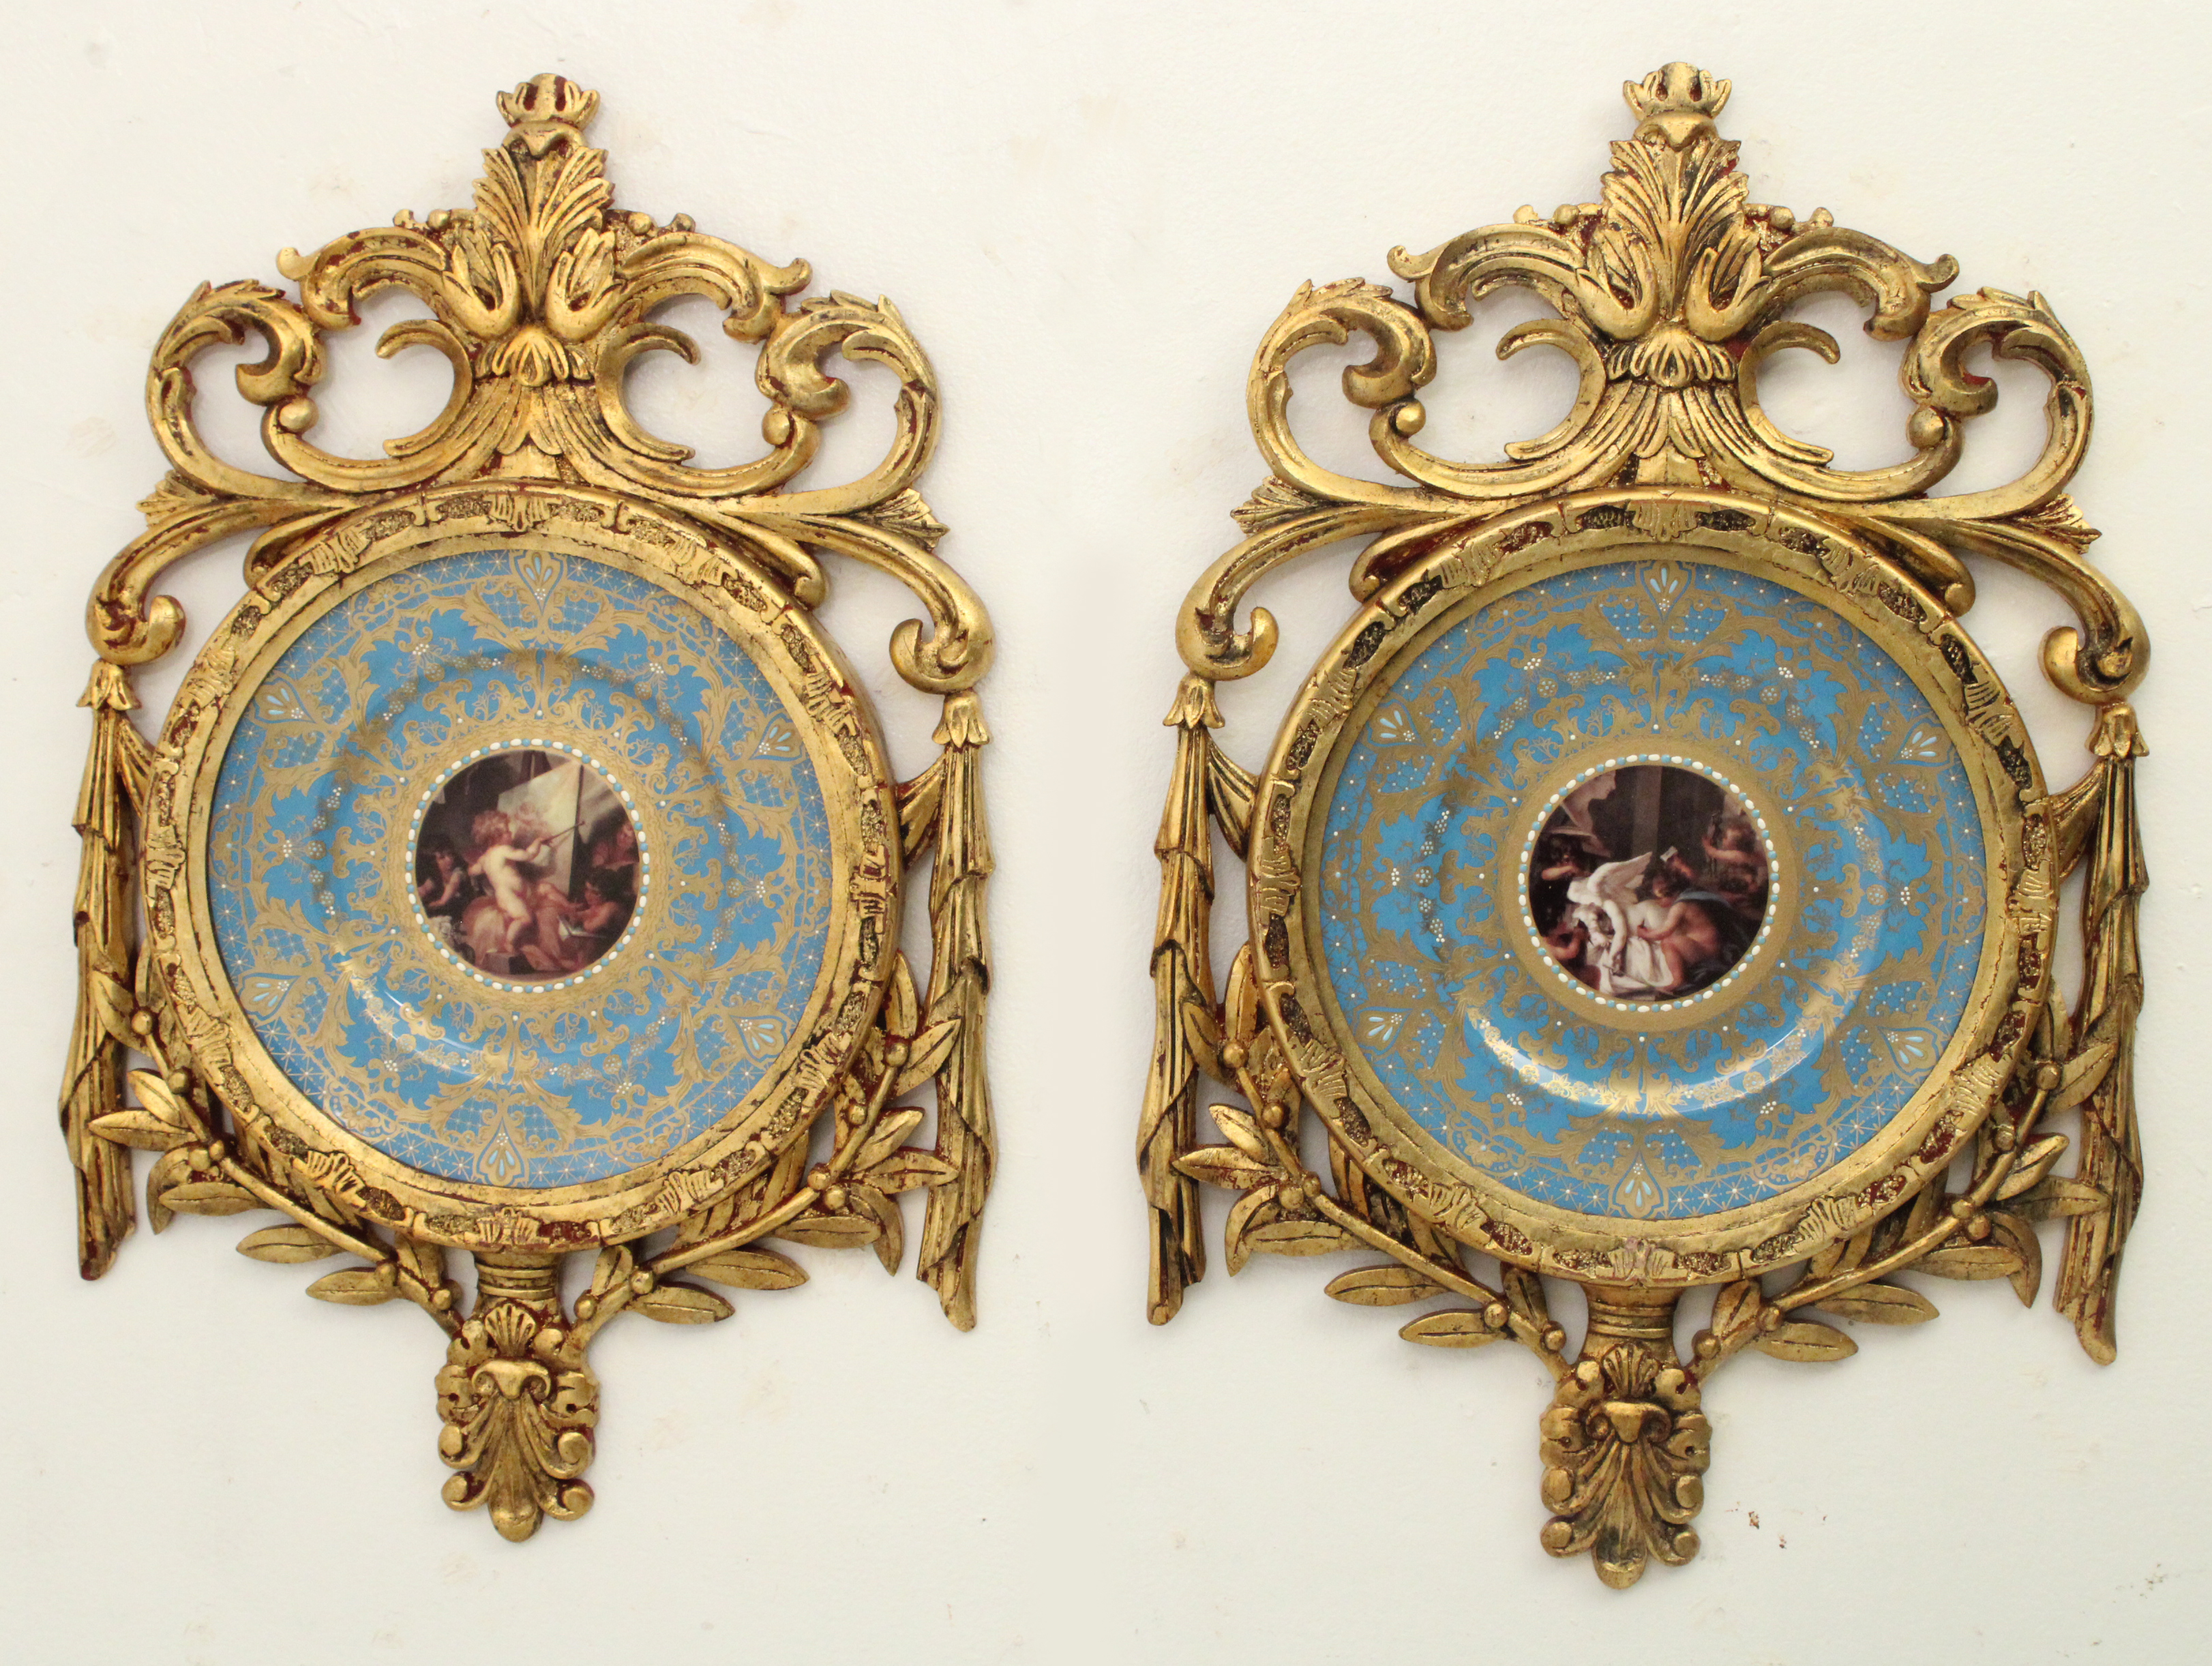 PAIR OF SEVRES STYLE PORCELAIN 35e745